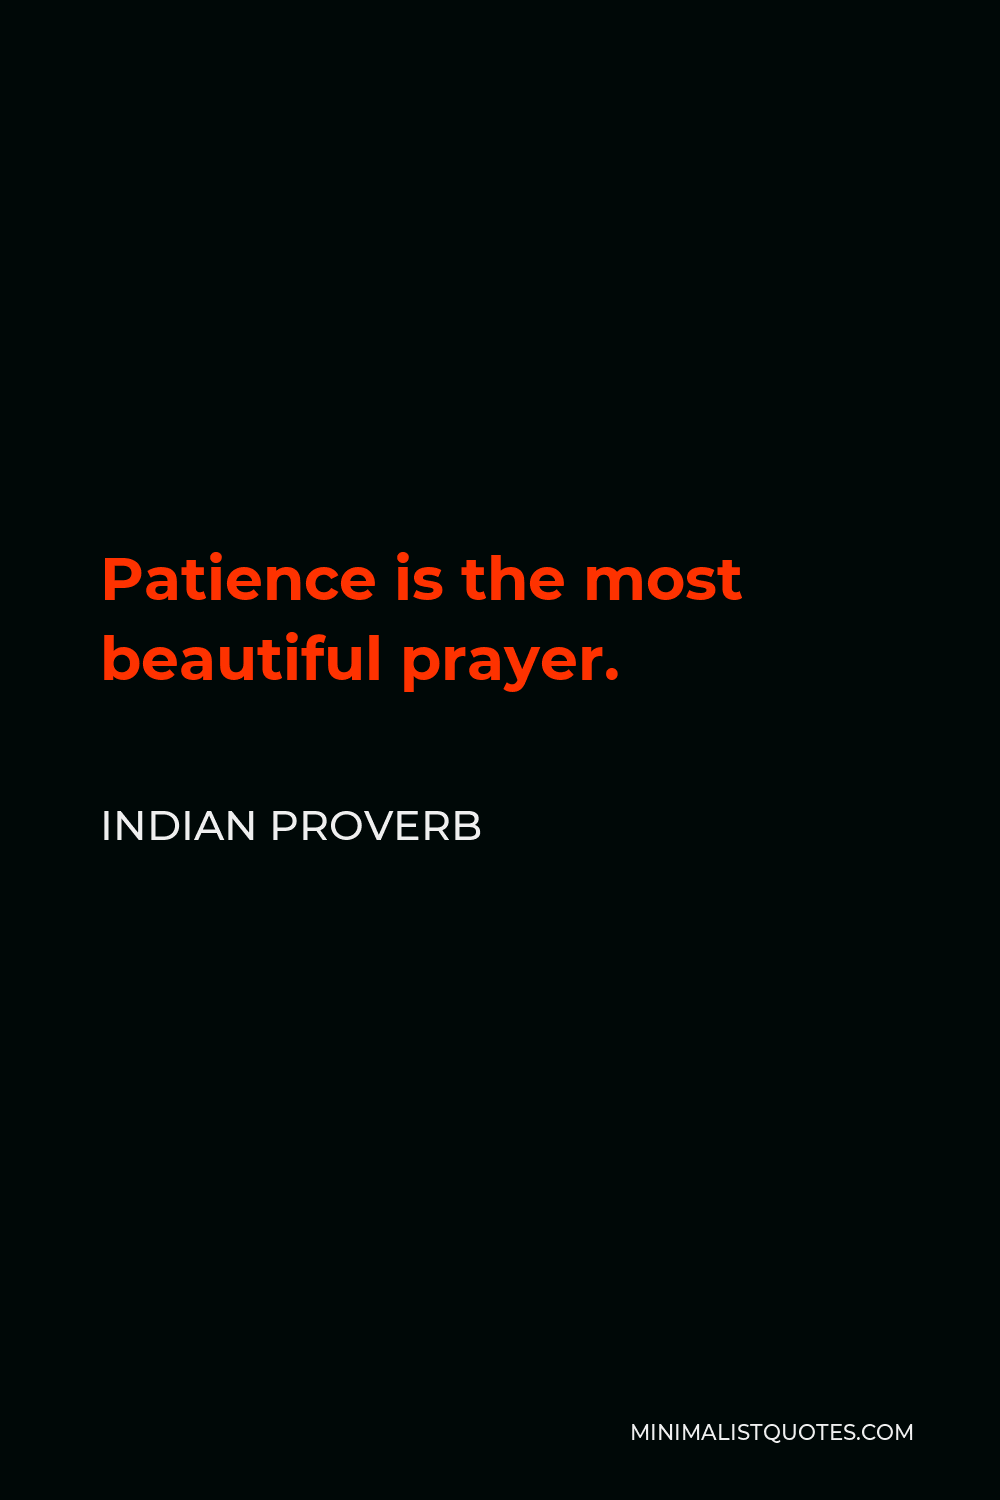 Indian Proverb Quote - Patience is the most beautiful prayer.